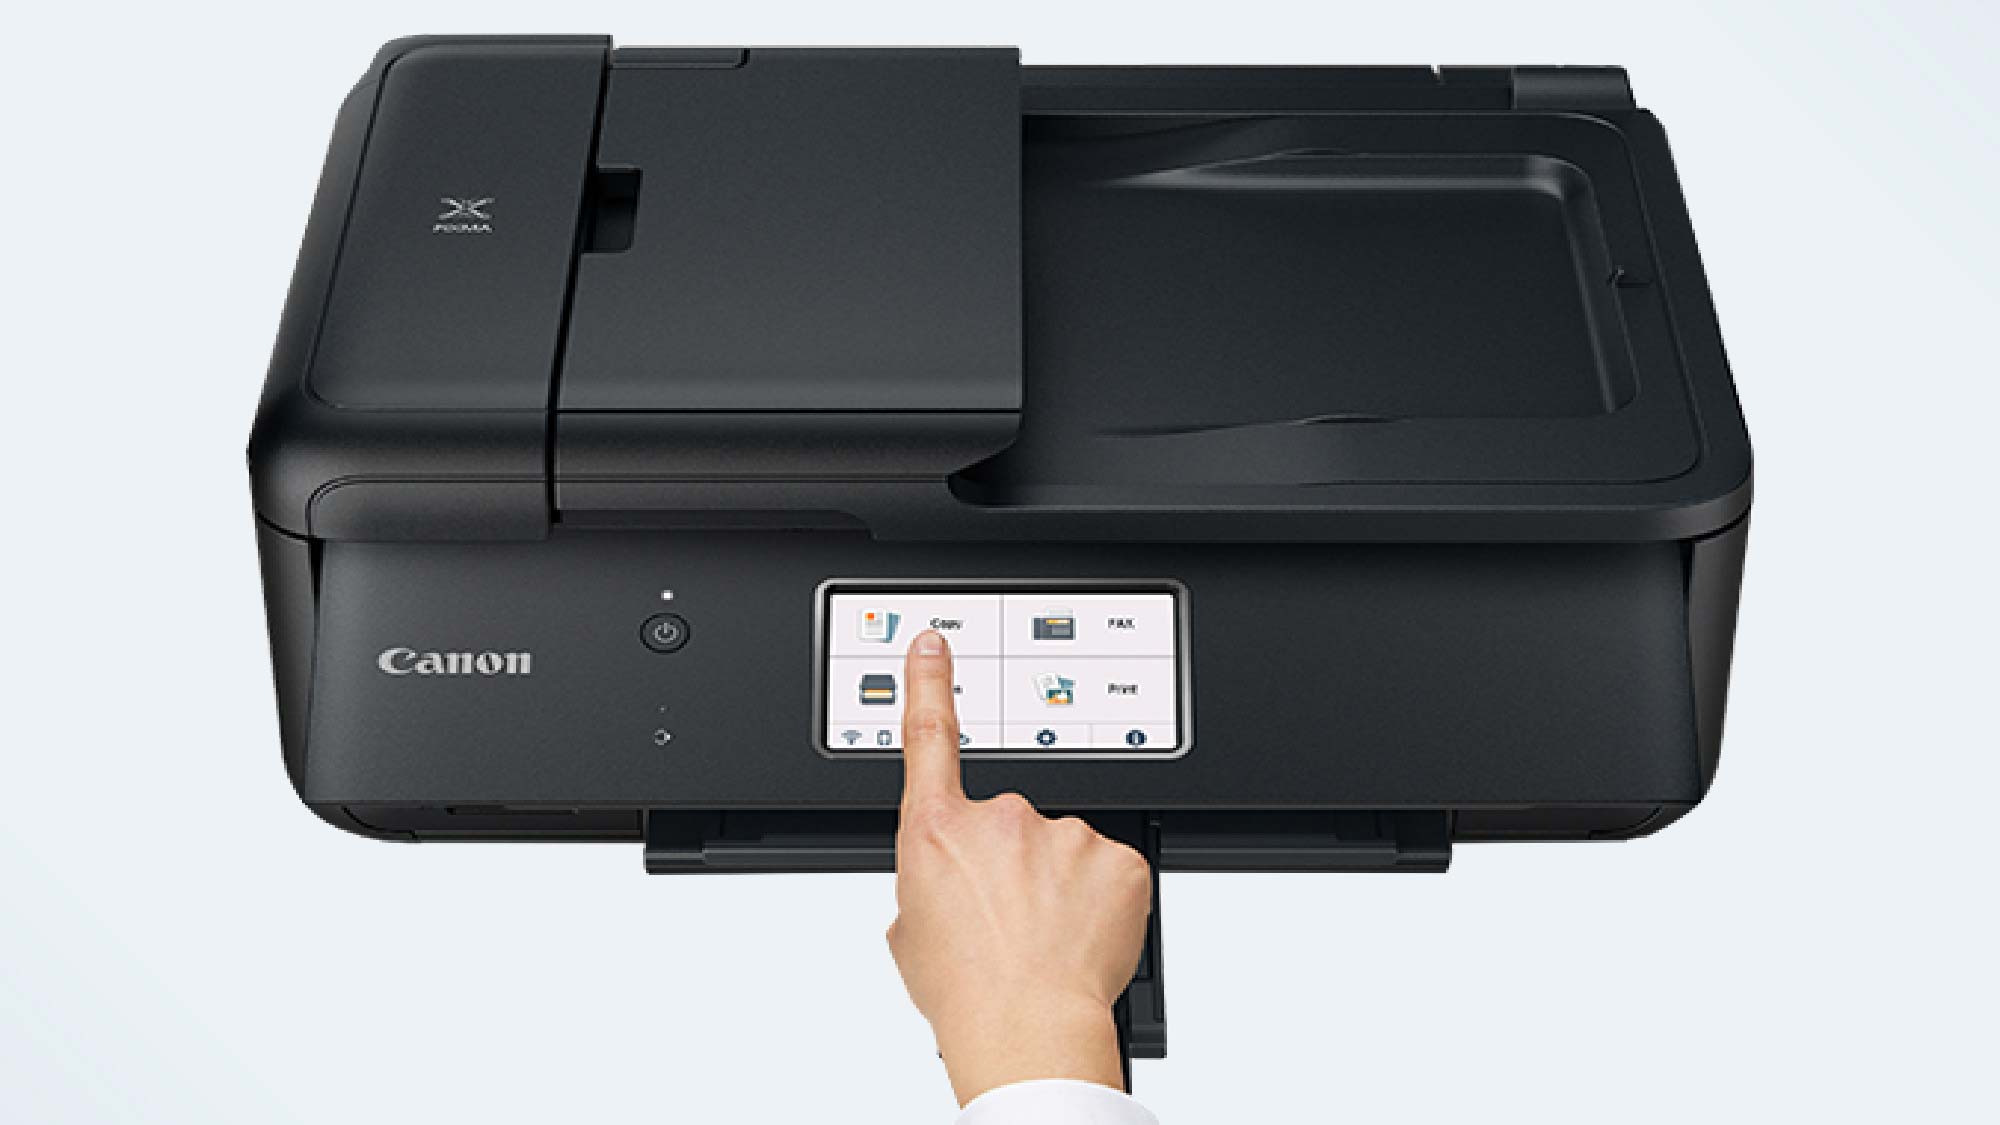 How to Configure a Printer in Windows 10?